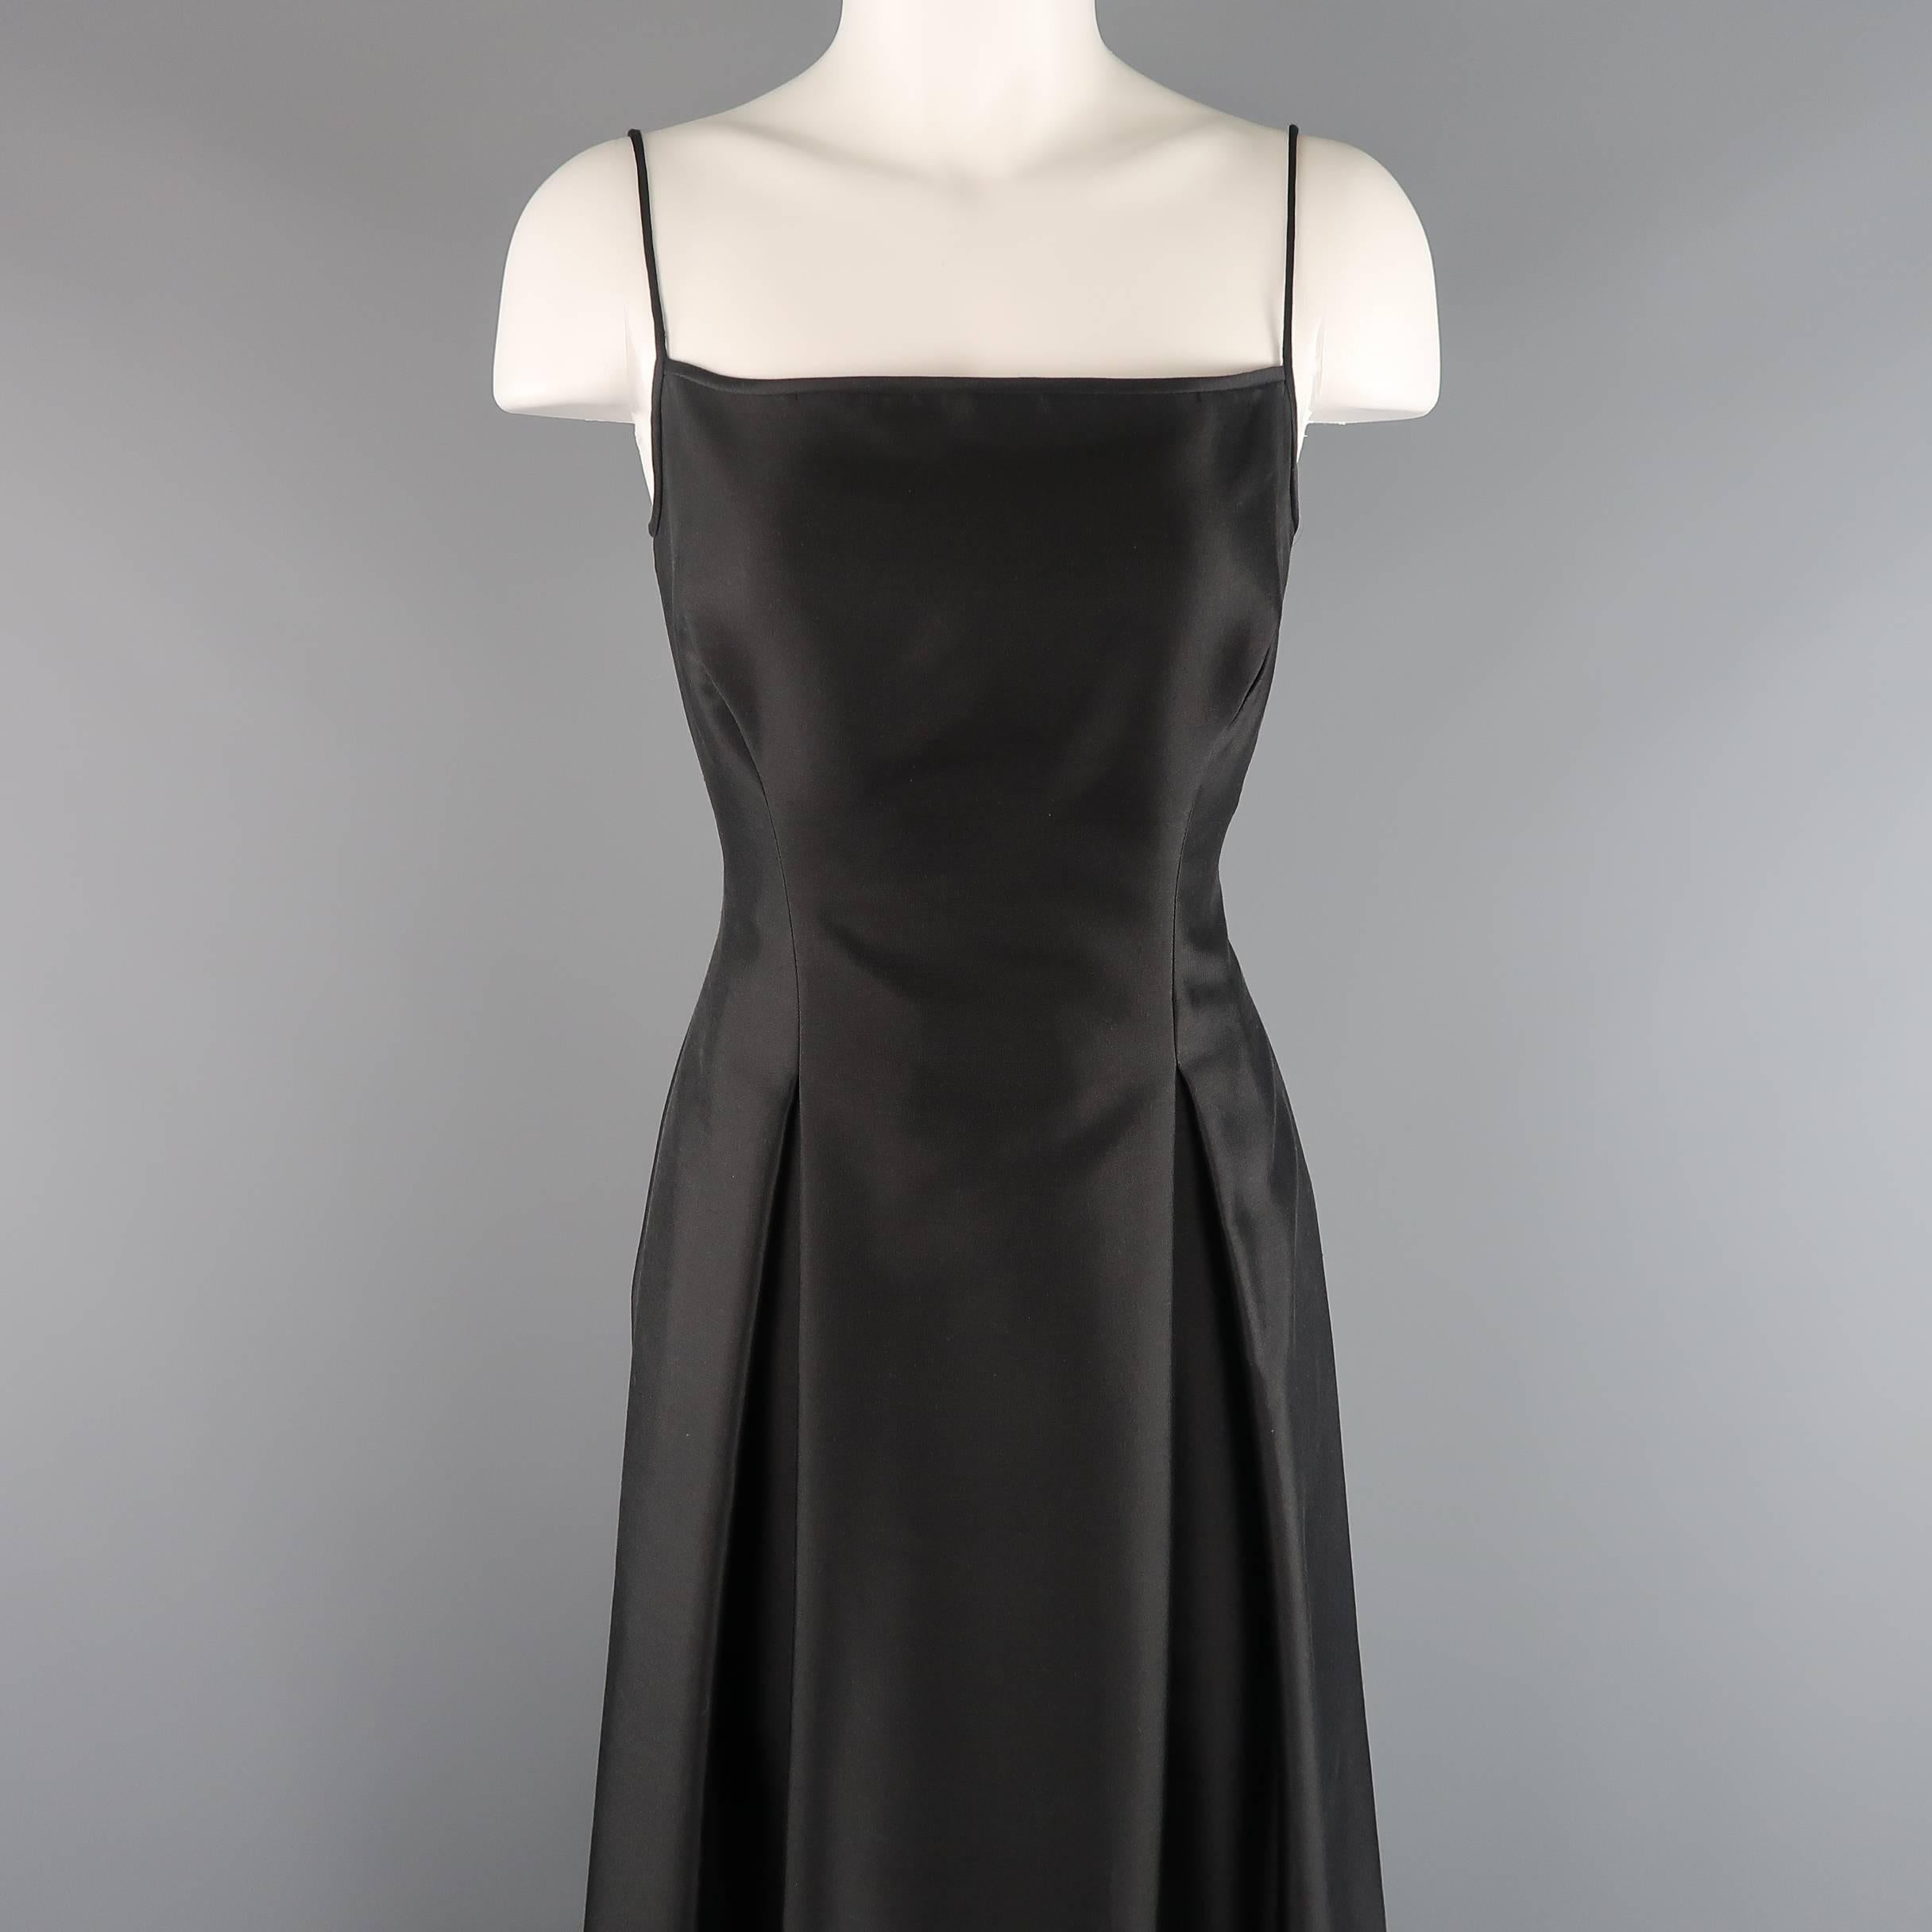 PAMELA DENNIS COUTURE gown comes in a wool silk structured satin and features a square neckline, spaghetti straps, and full A line skirt with box pleat details. Minor wear on train. As-Is.
 
Good Pre-Owned Condition.
Marked: 6
 
Measurements:
